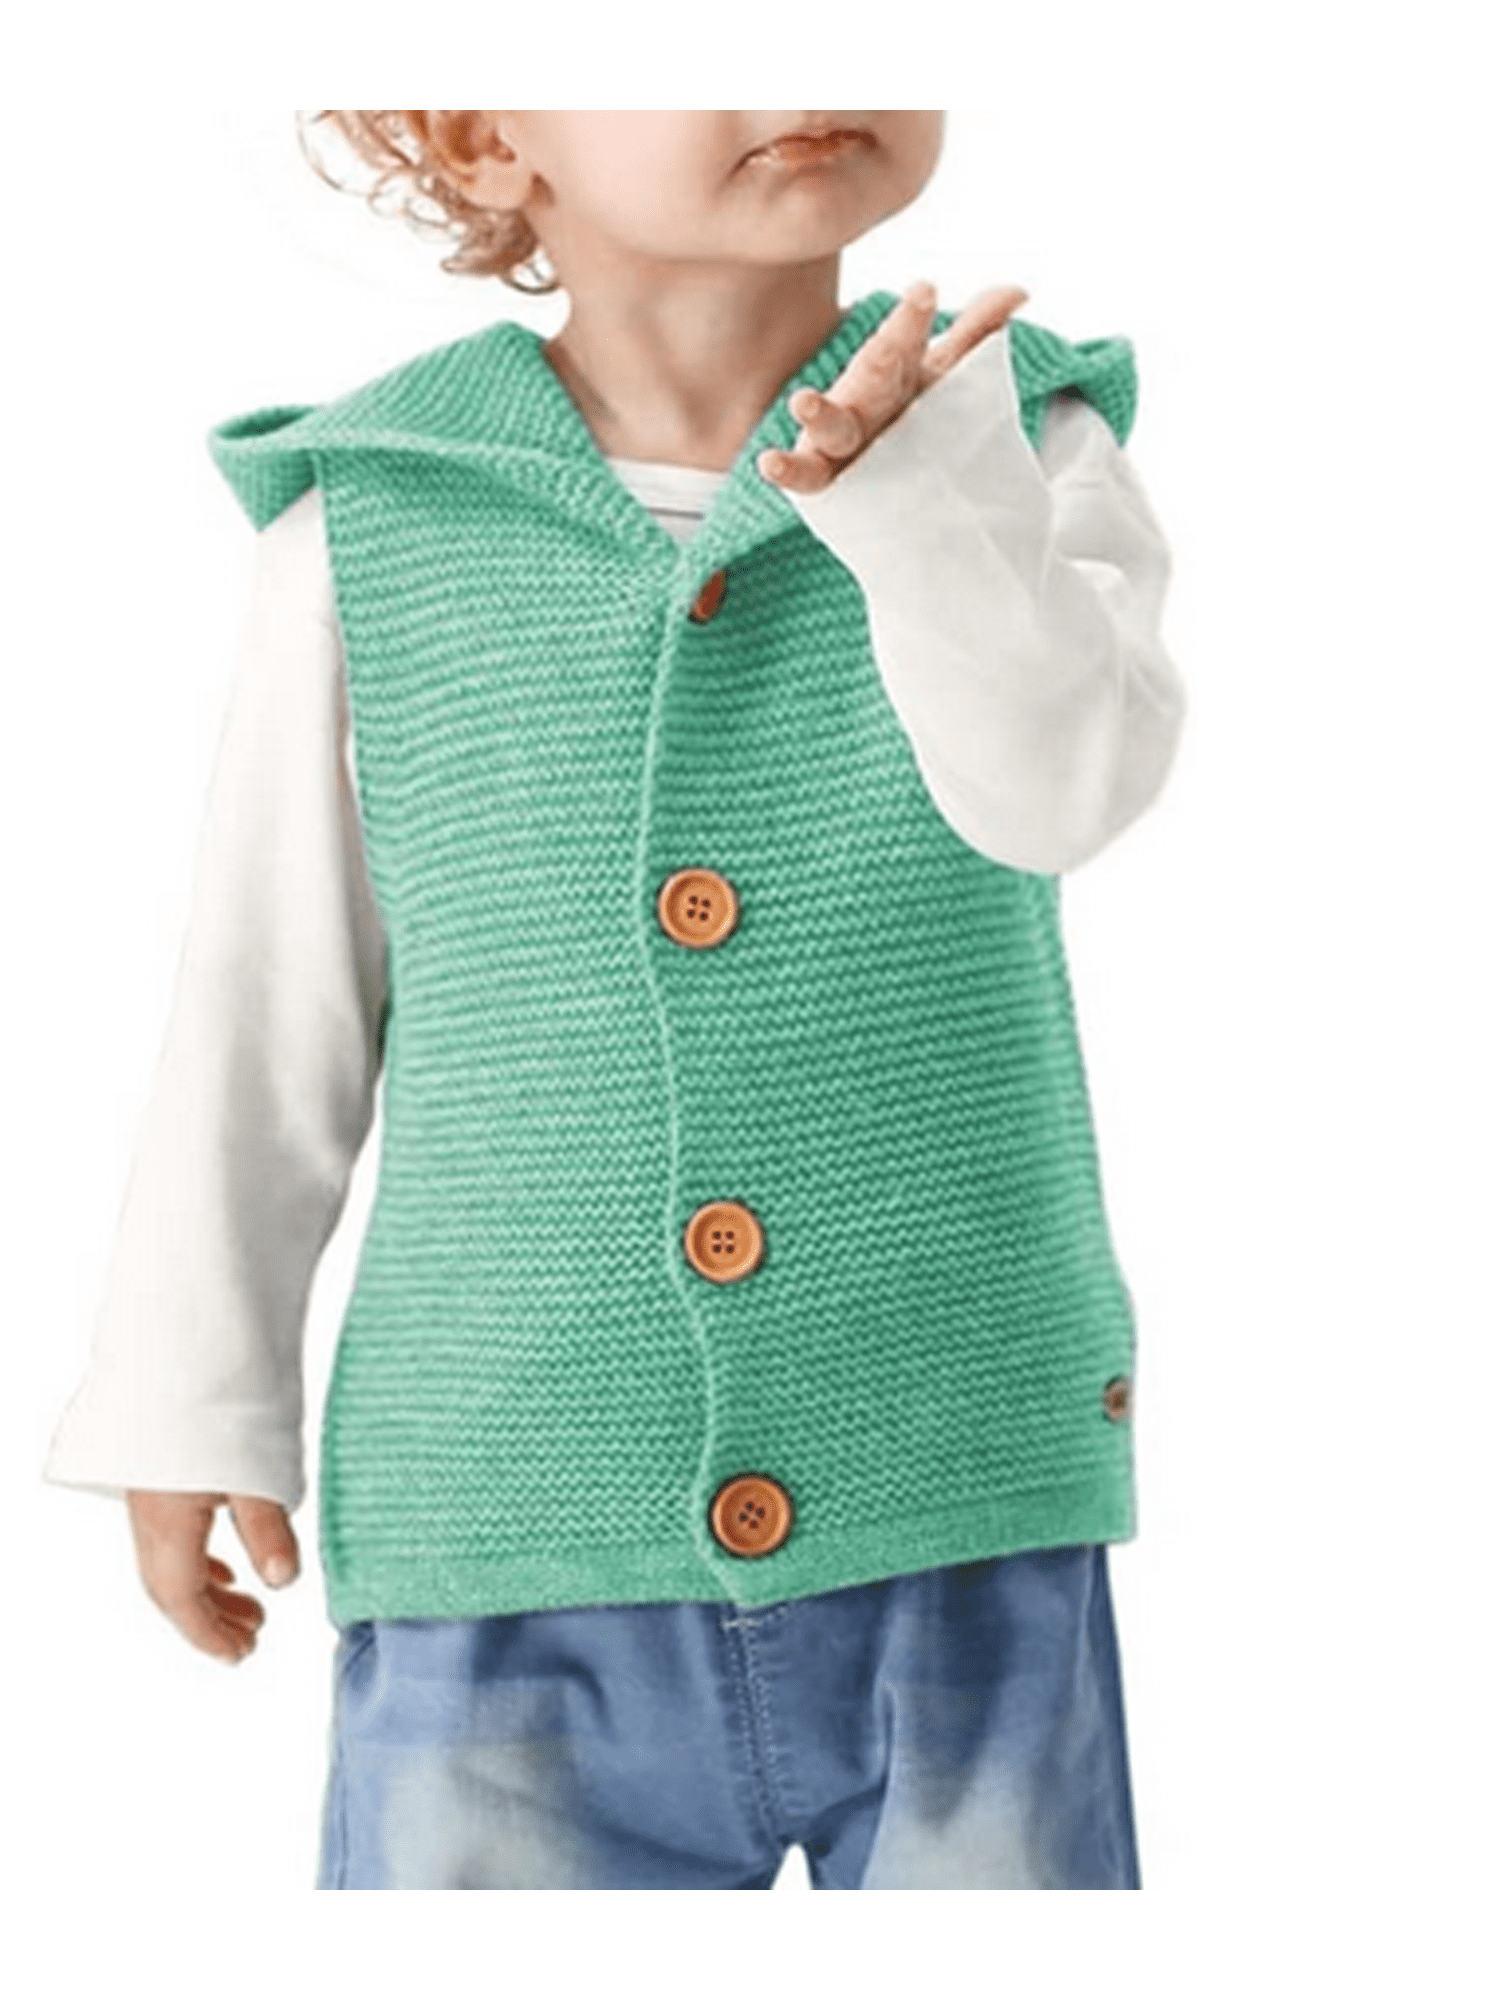 Newborn Infant Jacket Vest Baby Knitted Sleeveless Hooded Sweater Autumn Winter Warm Pullover 